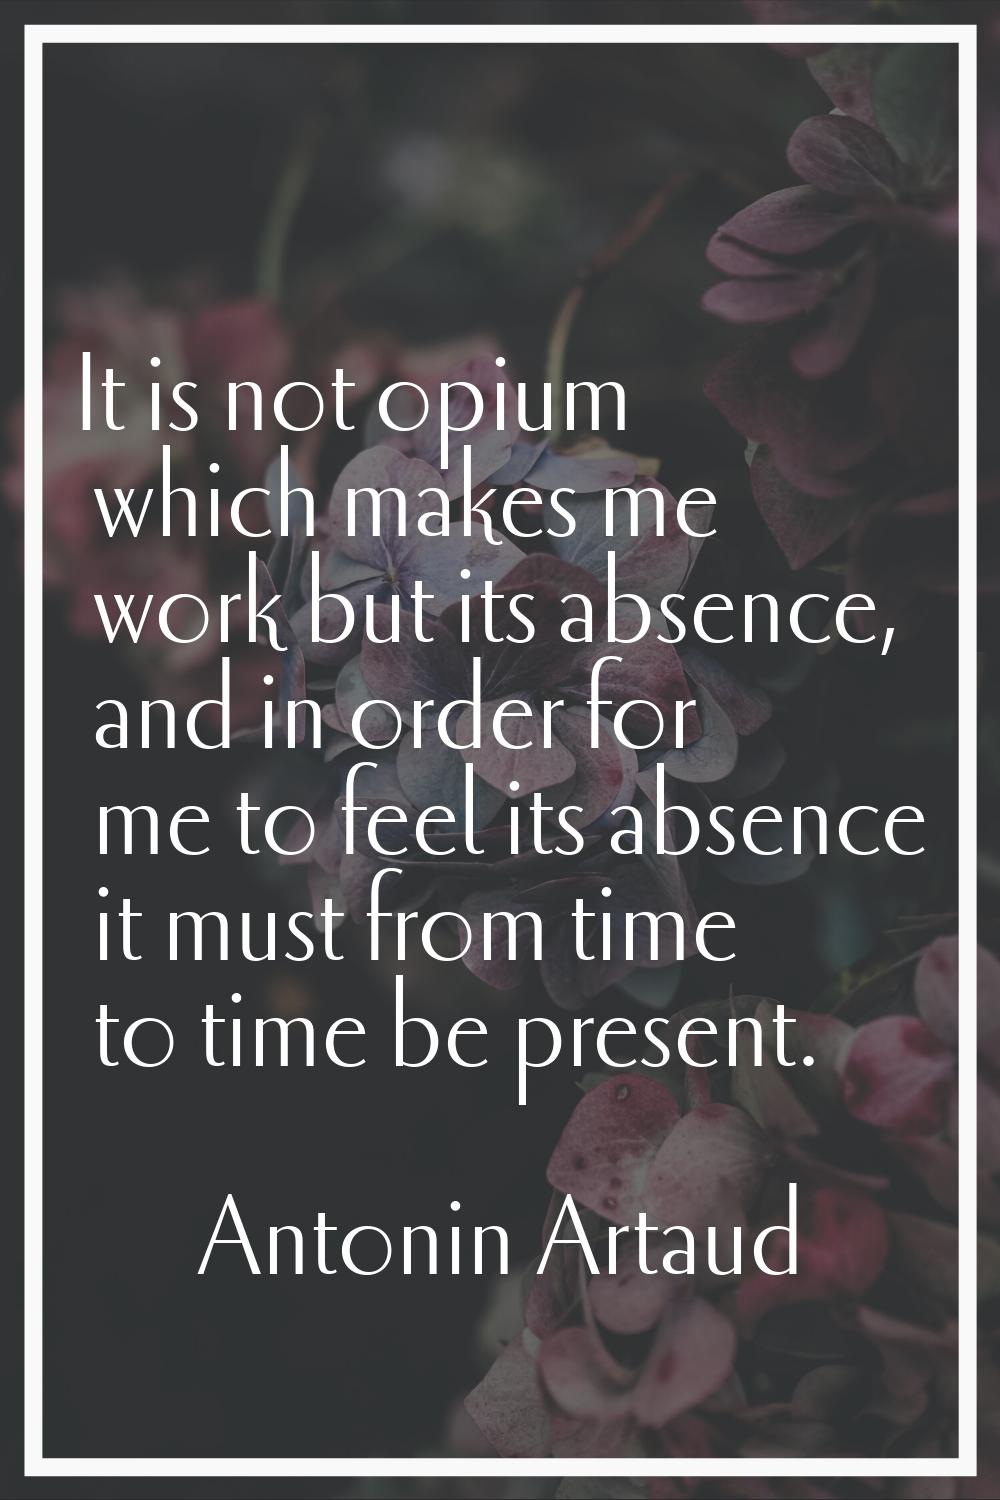 It is not opium which makes me work but its absence, and in order for me to feel its absence it mus